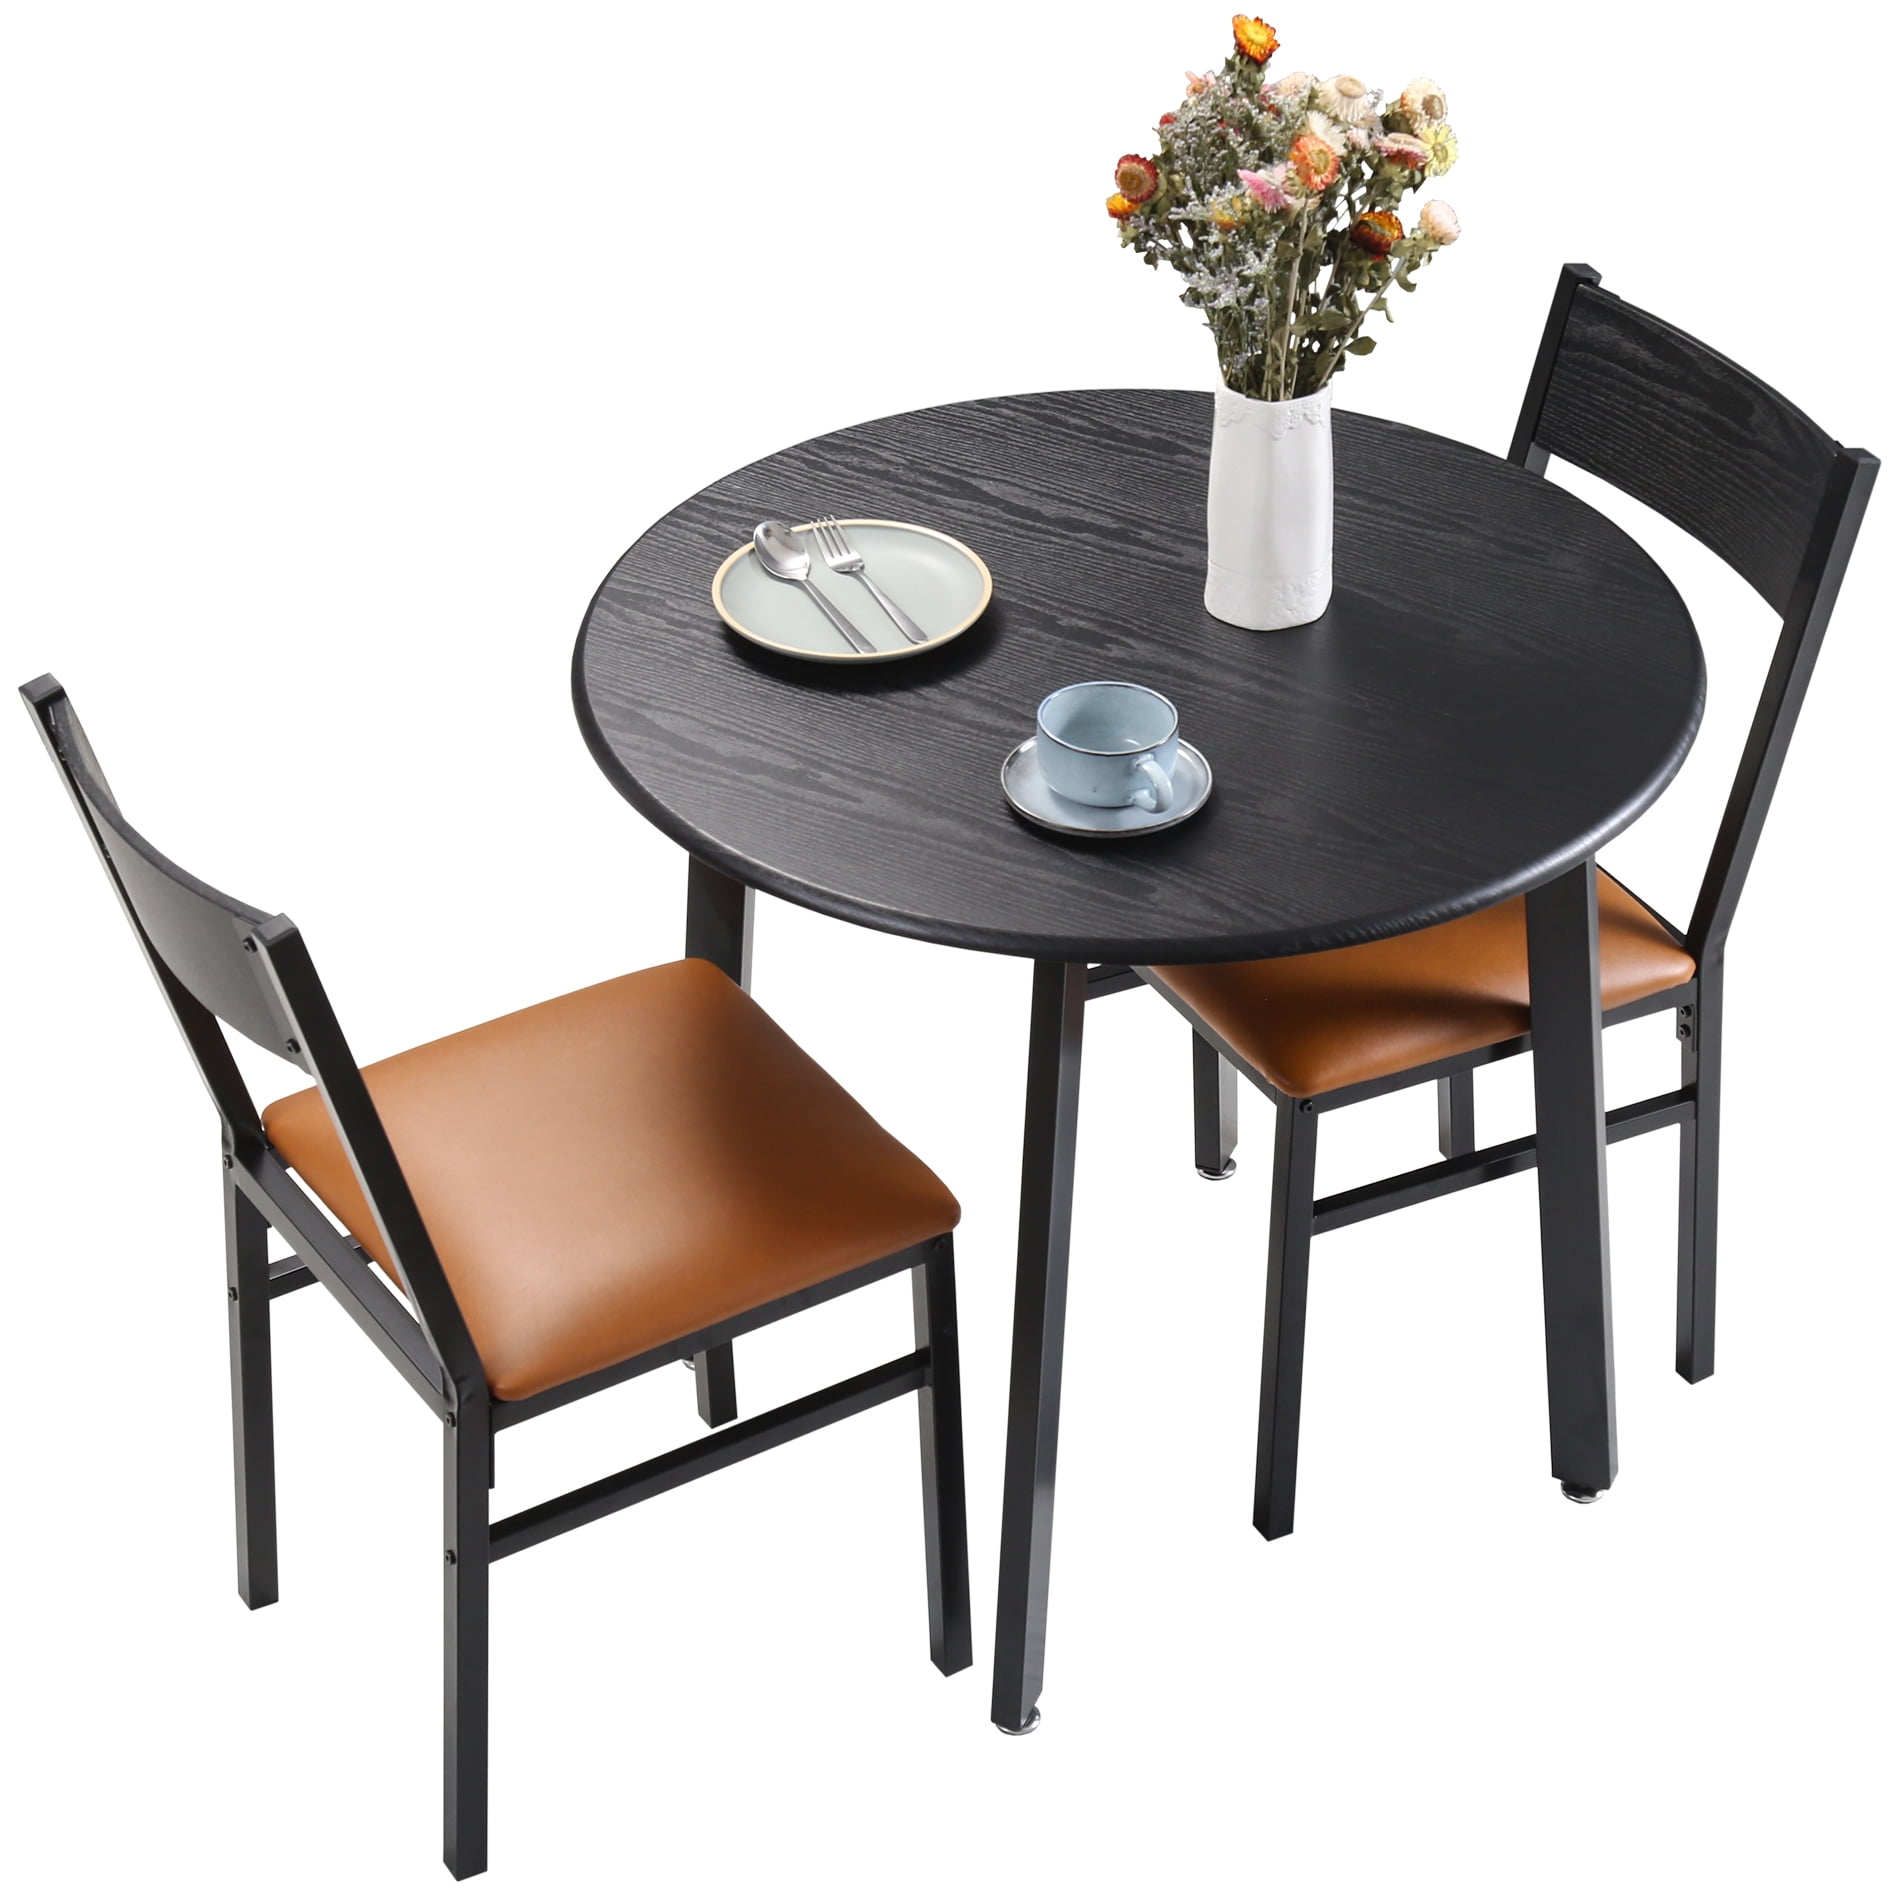 3 Piece Round Dining Table Set With, 3 Piece Dining Room Set